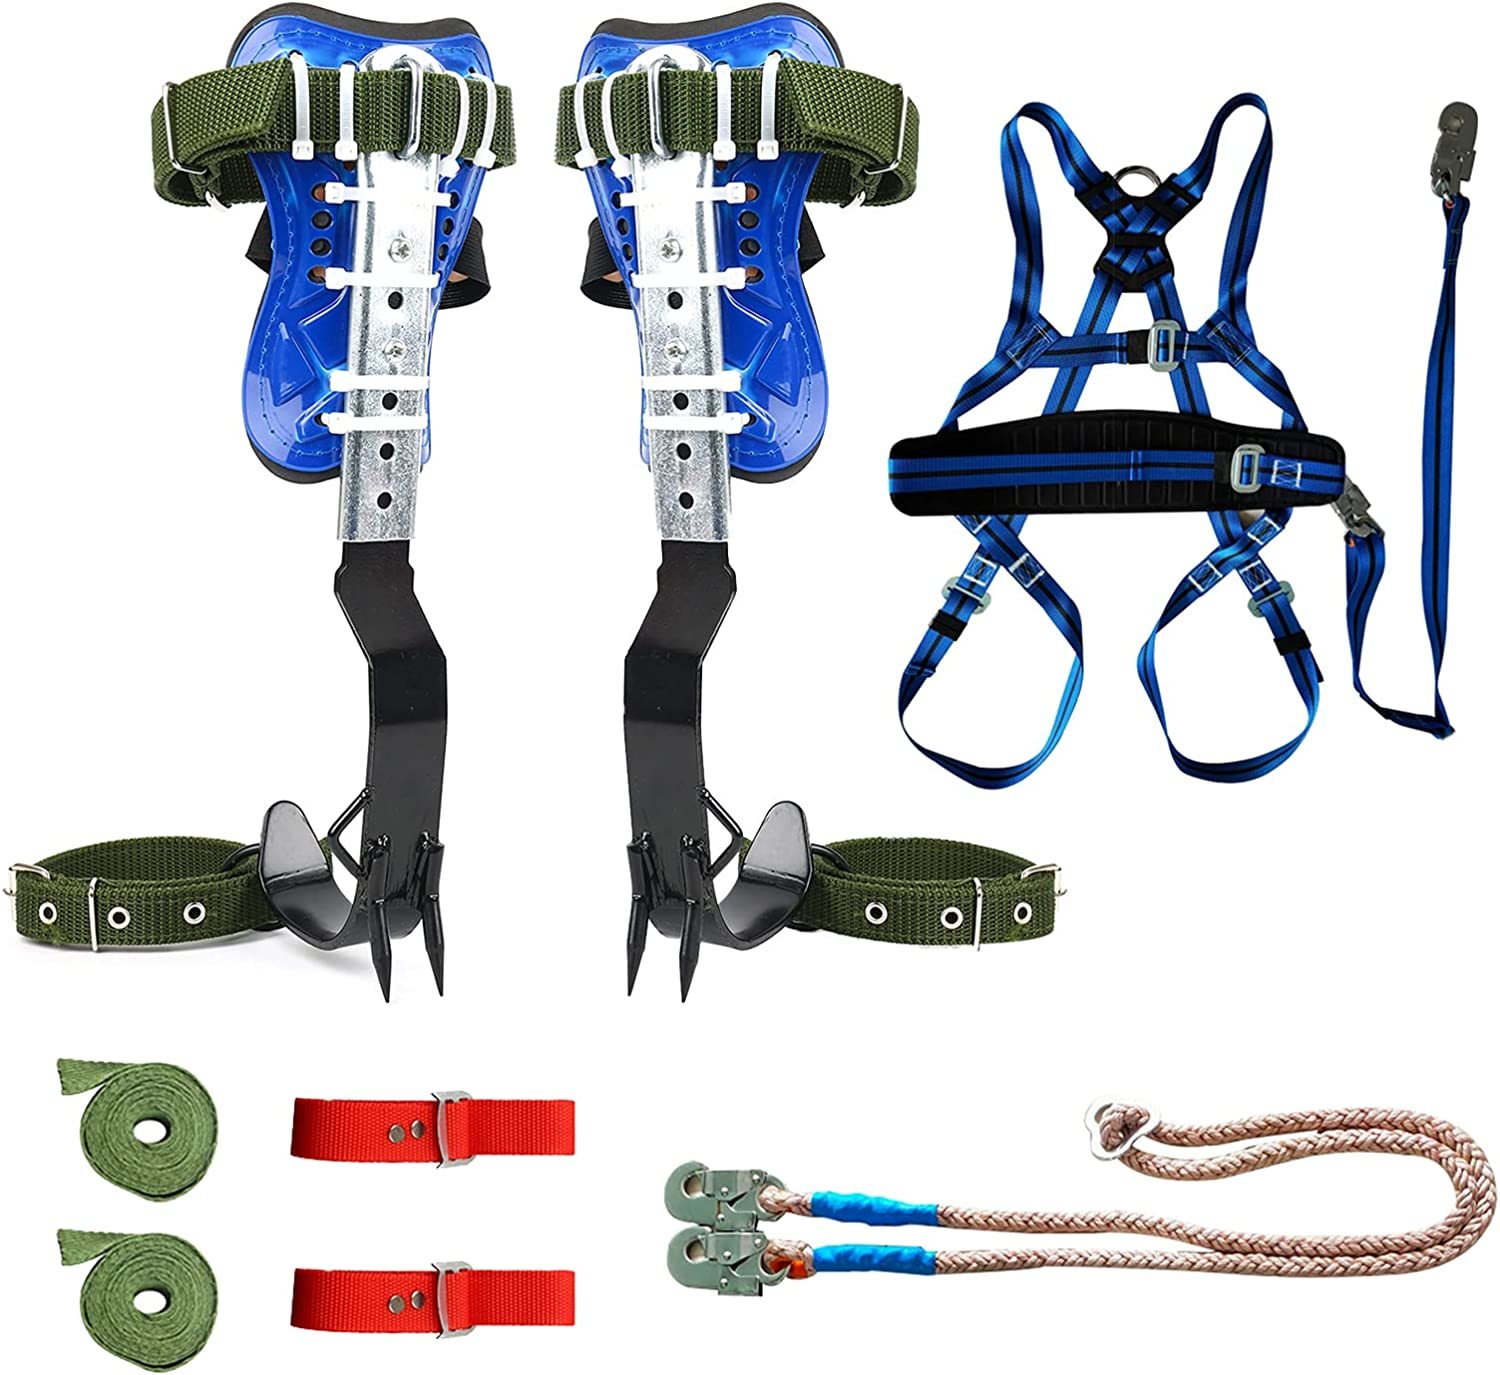 Primary image for Wmlbk Adjustable Tree Climbing Spikes With 5 Point Safety Belt Lanyard, Tree